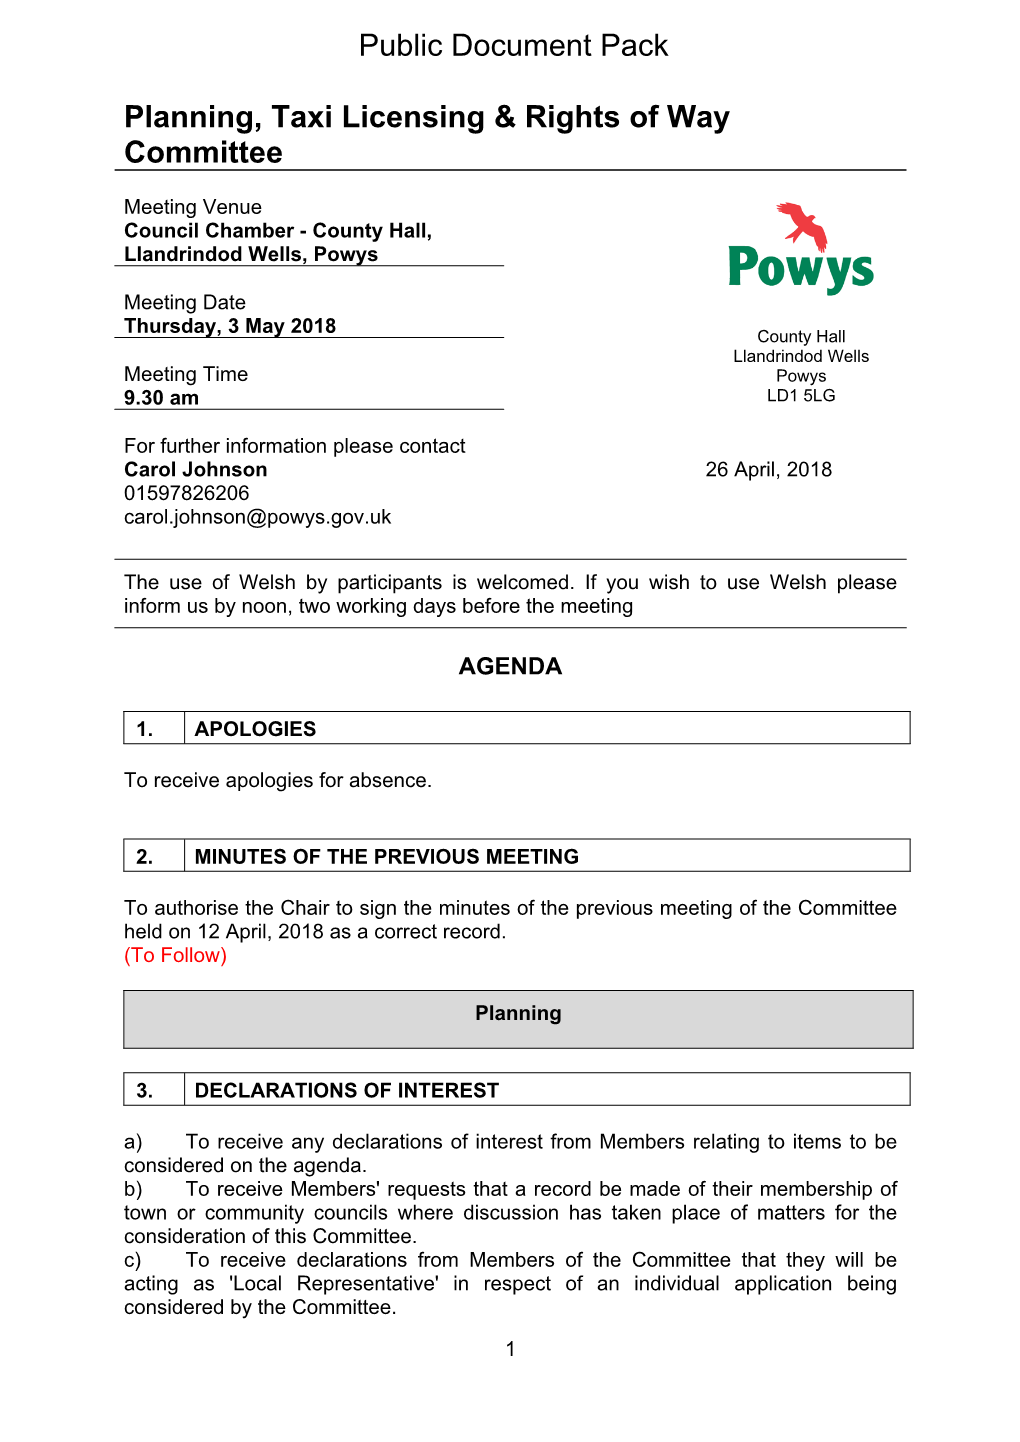 (Public Pack)Agenda Document for Planning, Taxi Licensing & Rights of Way Committee, 03/05/2018 09:30